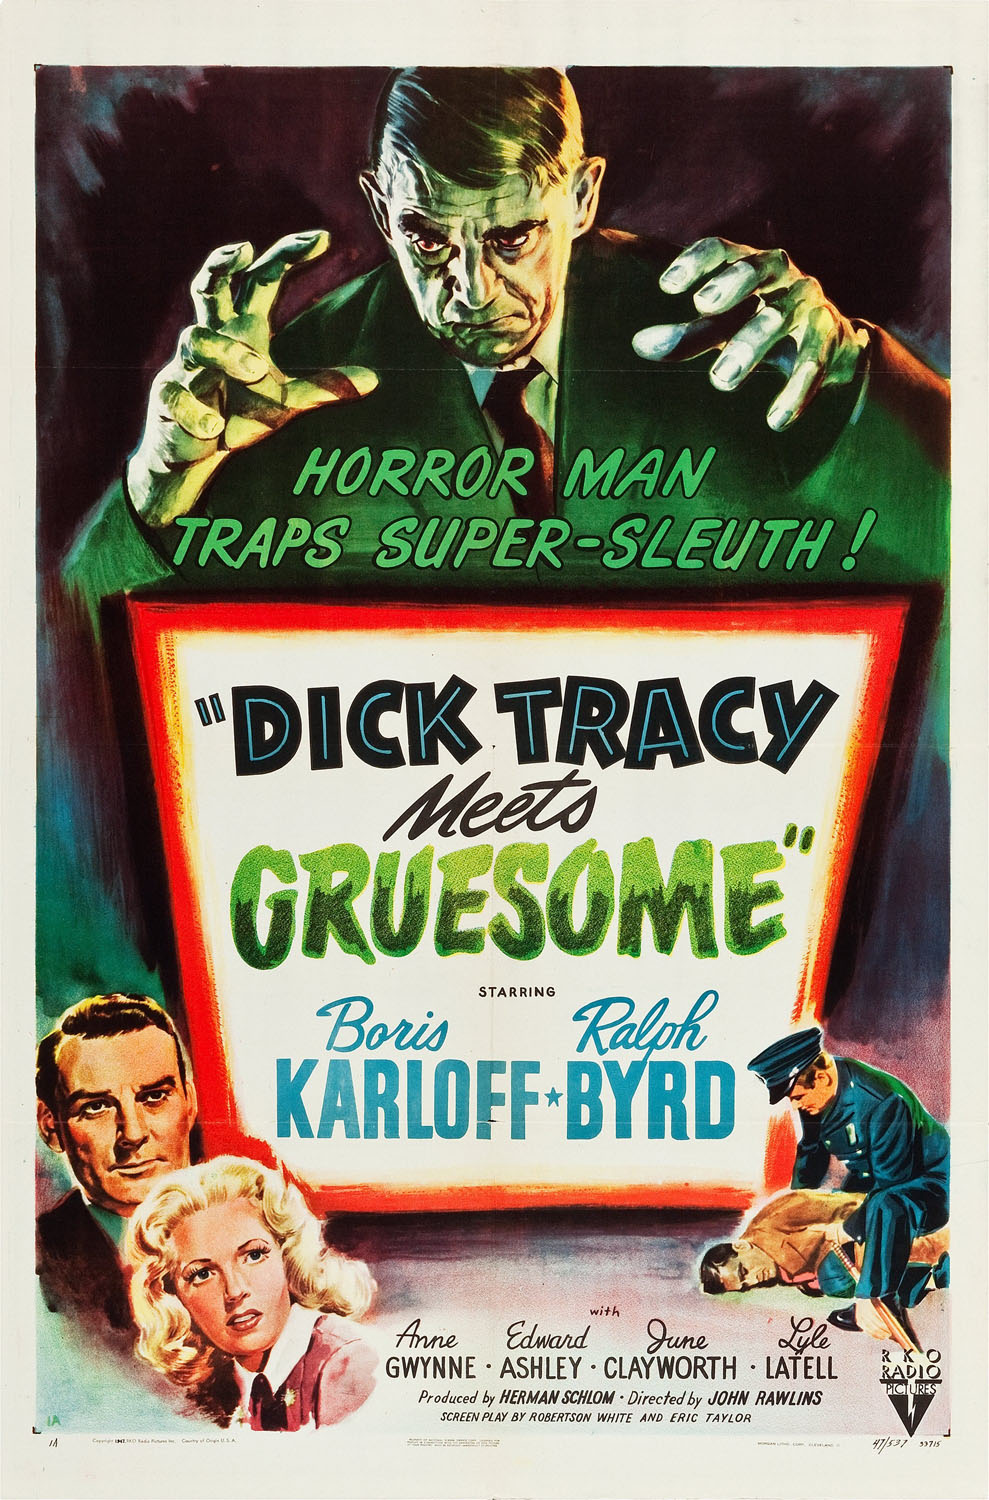 DICK TRACY MEETS GRUESOME